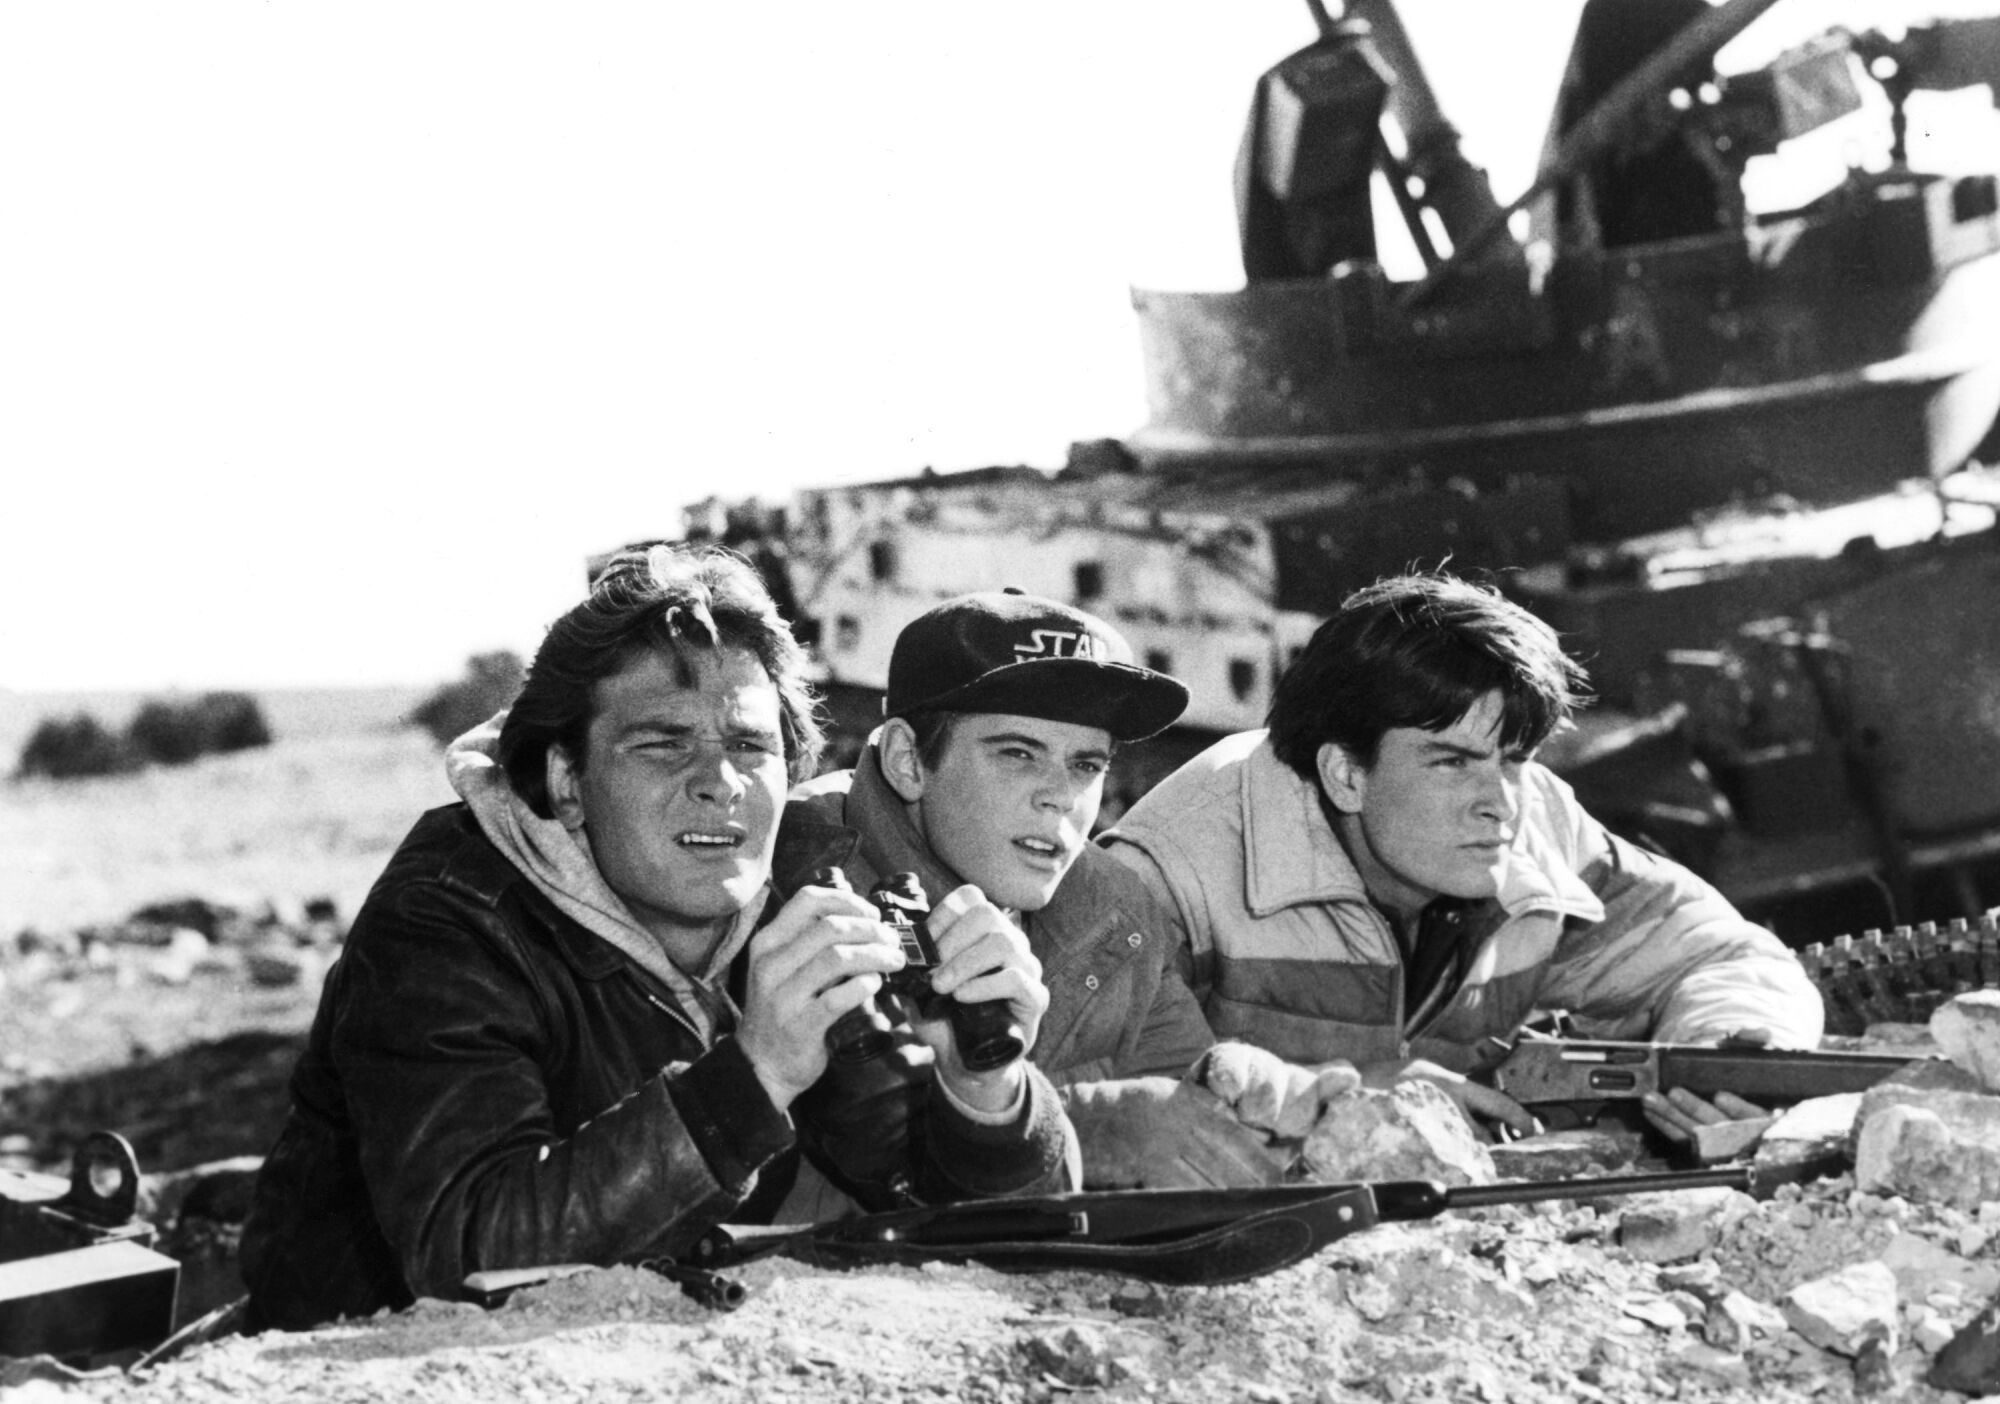 A black-and-white film still shows Patrick Swayze, C. Thomas Howell and Charlie Sheen crouching in front of a tank.